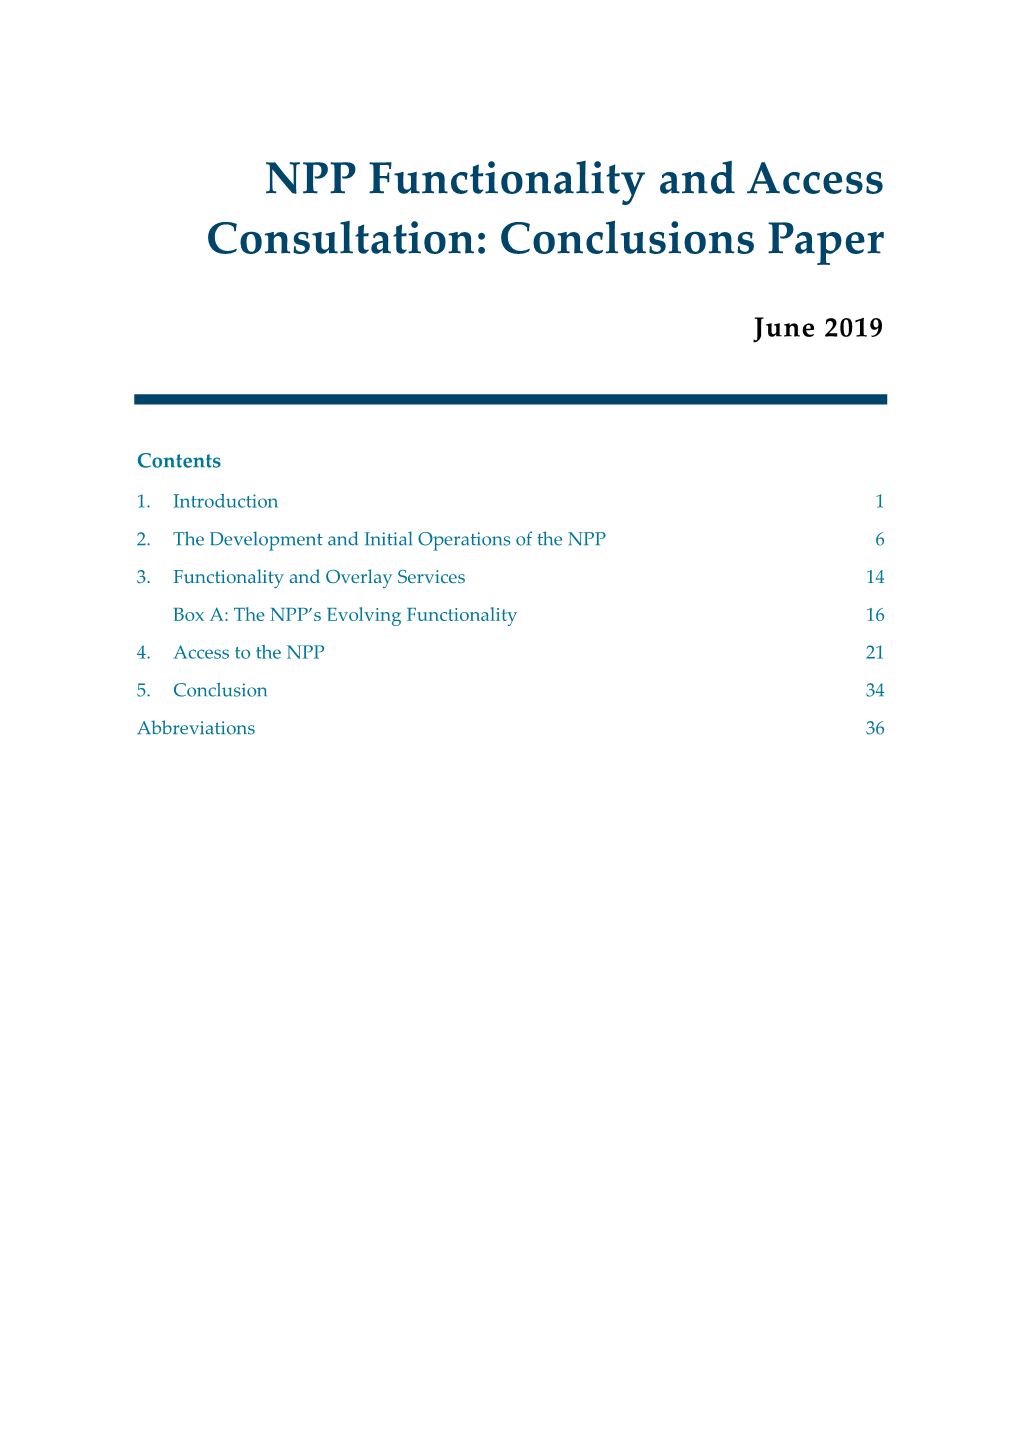 NPP Functionality and Access Consultation: Conclusions Paper